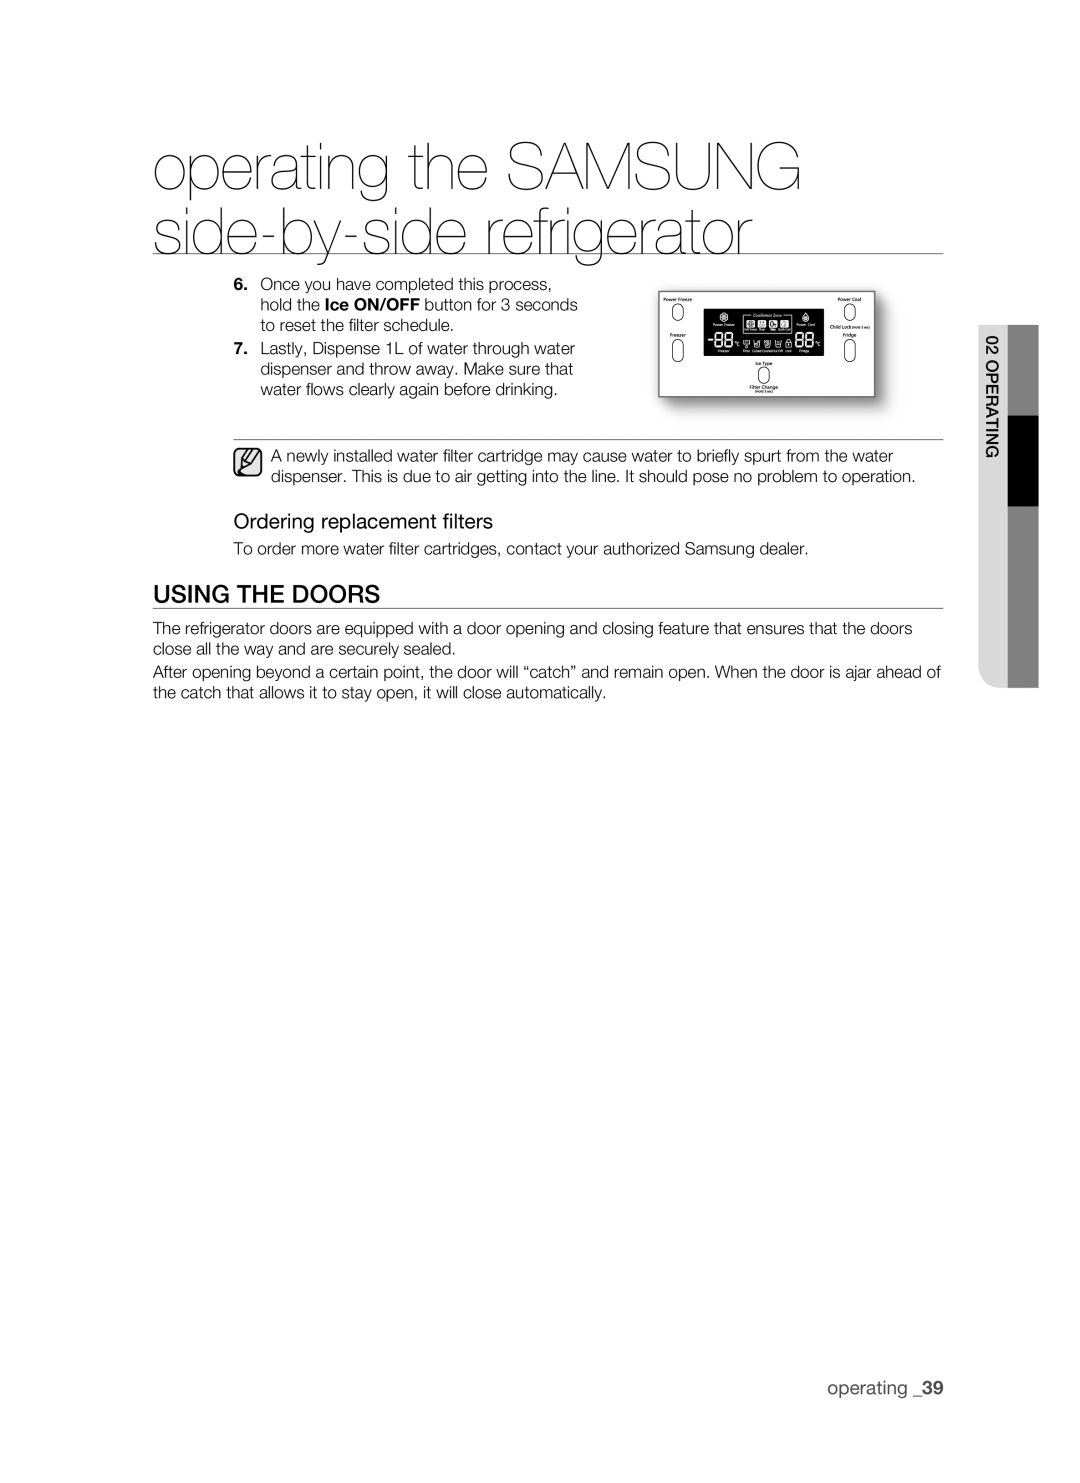 Samsung RSH1B, SRS610HDSS Using the doors, operating the SAMSUNG side-by-side refrigerator, Ordering replacement filters 